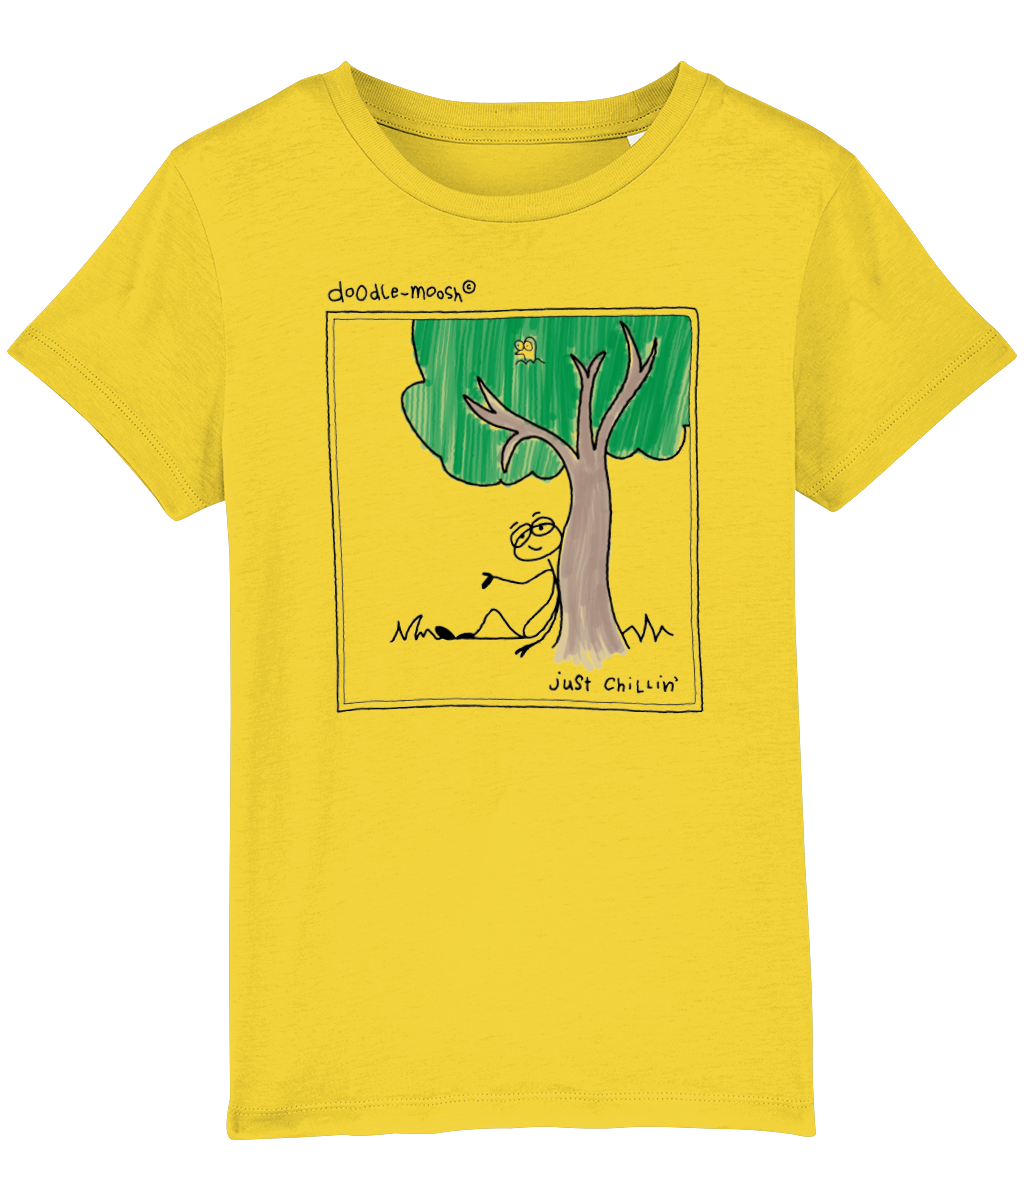 Just chilling t-shirt, yellow with black, colorful drawing